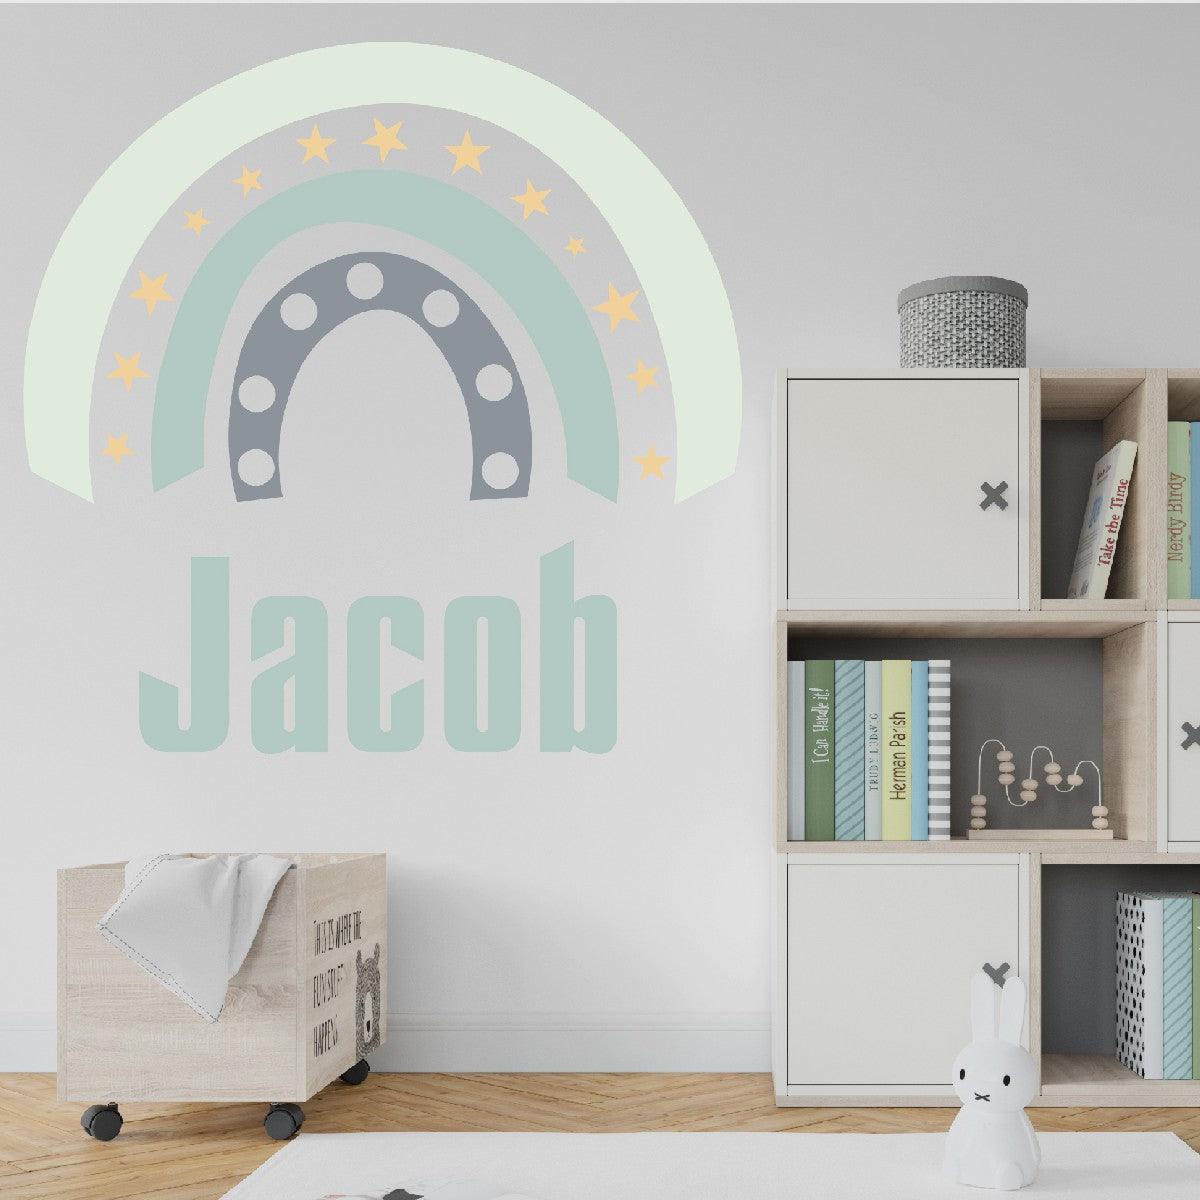 Boho Rainbow Horseshoe with Stars Wall Stickers - Whimsical Decal for Nursery and Girls' Bedroom Decor - Rainbow Sticker with Personalized Name